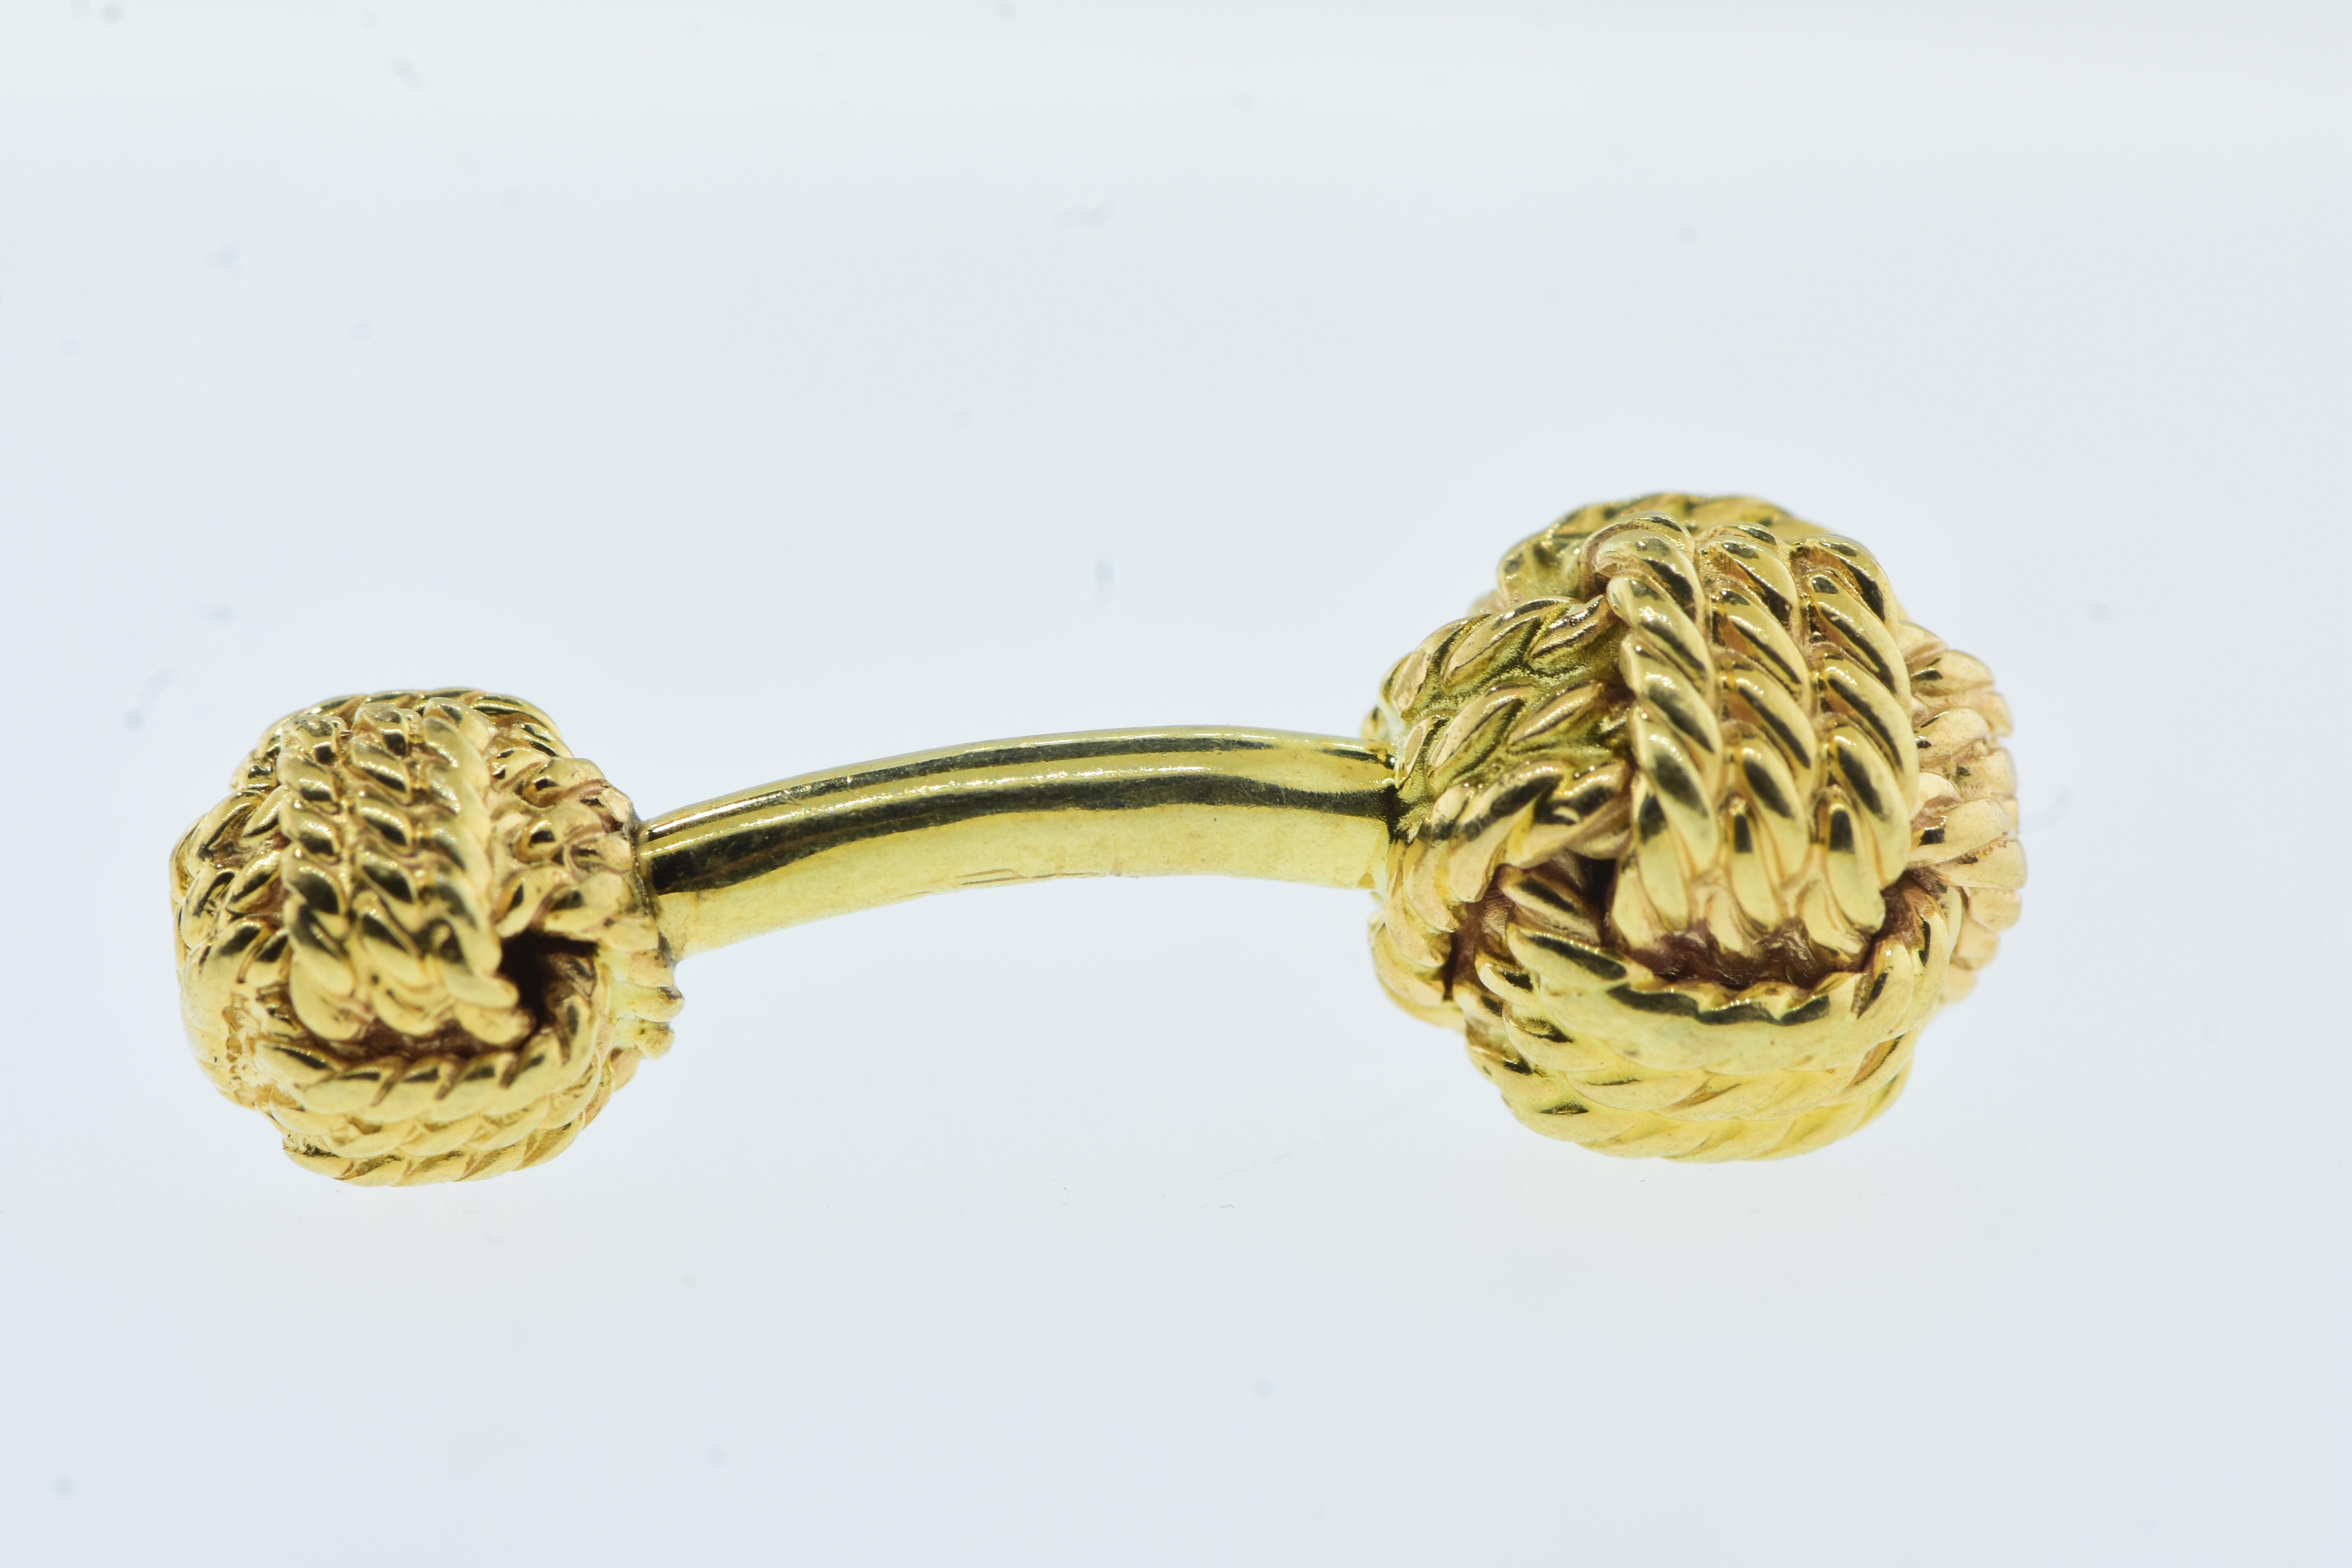 Contemporary Tiffany & Co. Yellow Gold Cuff & Stud Set in a Love Knot Motif, Vintage, c. 1970 For Sale